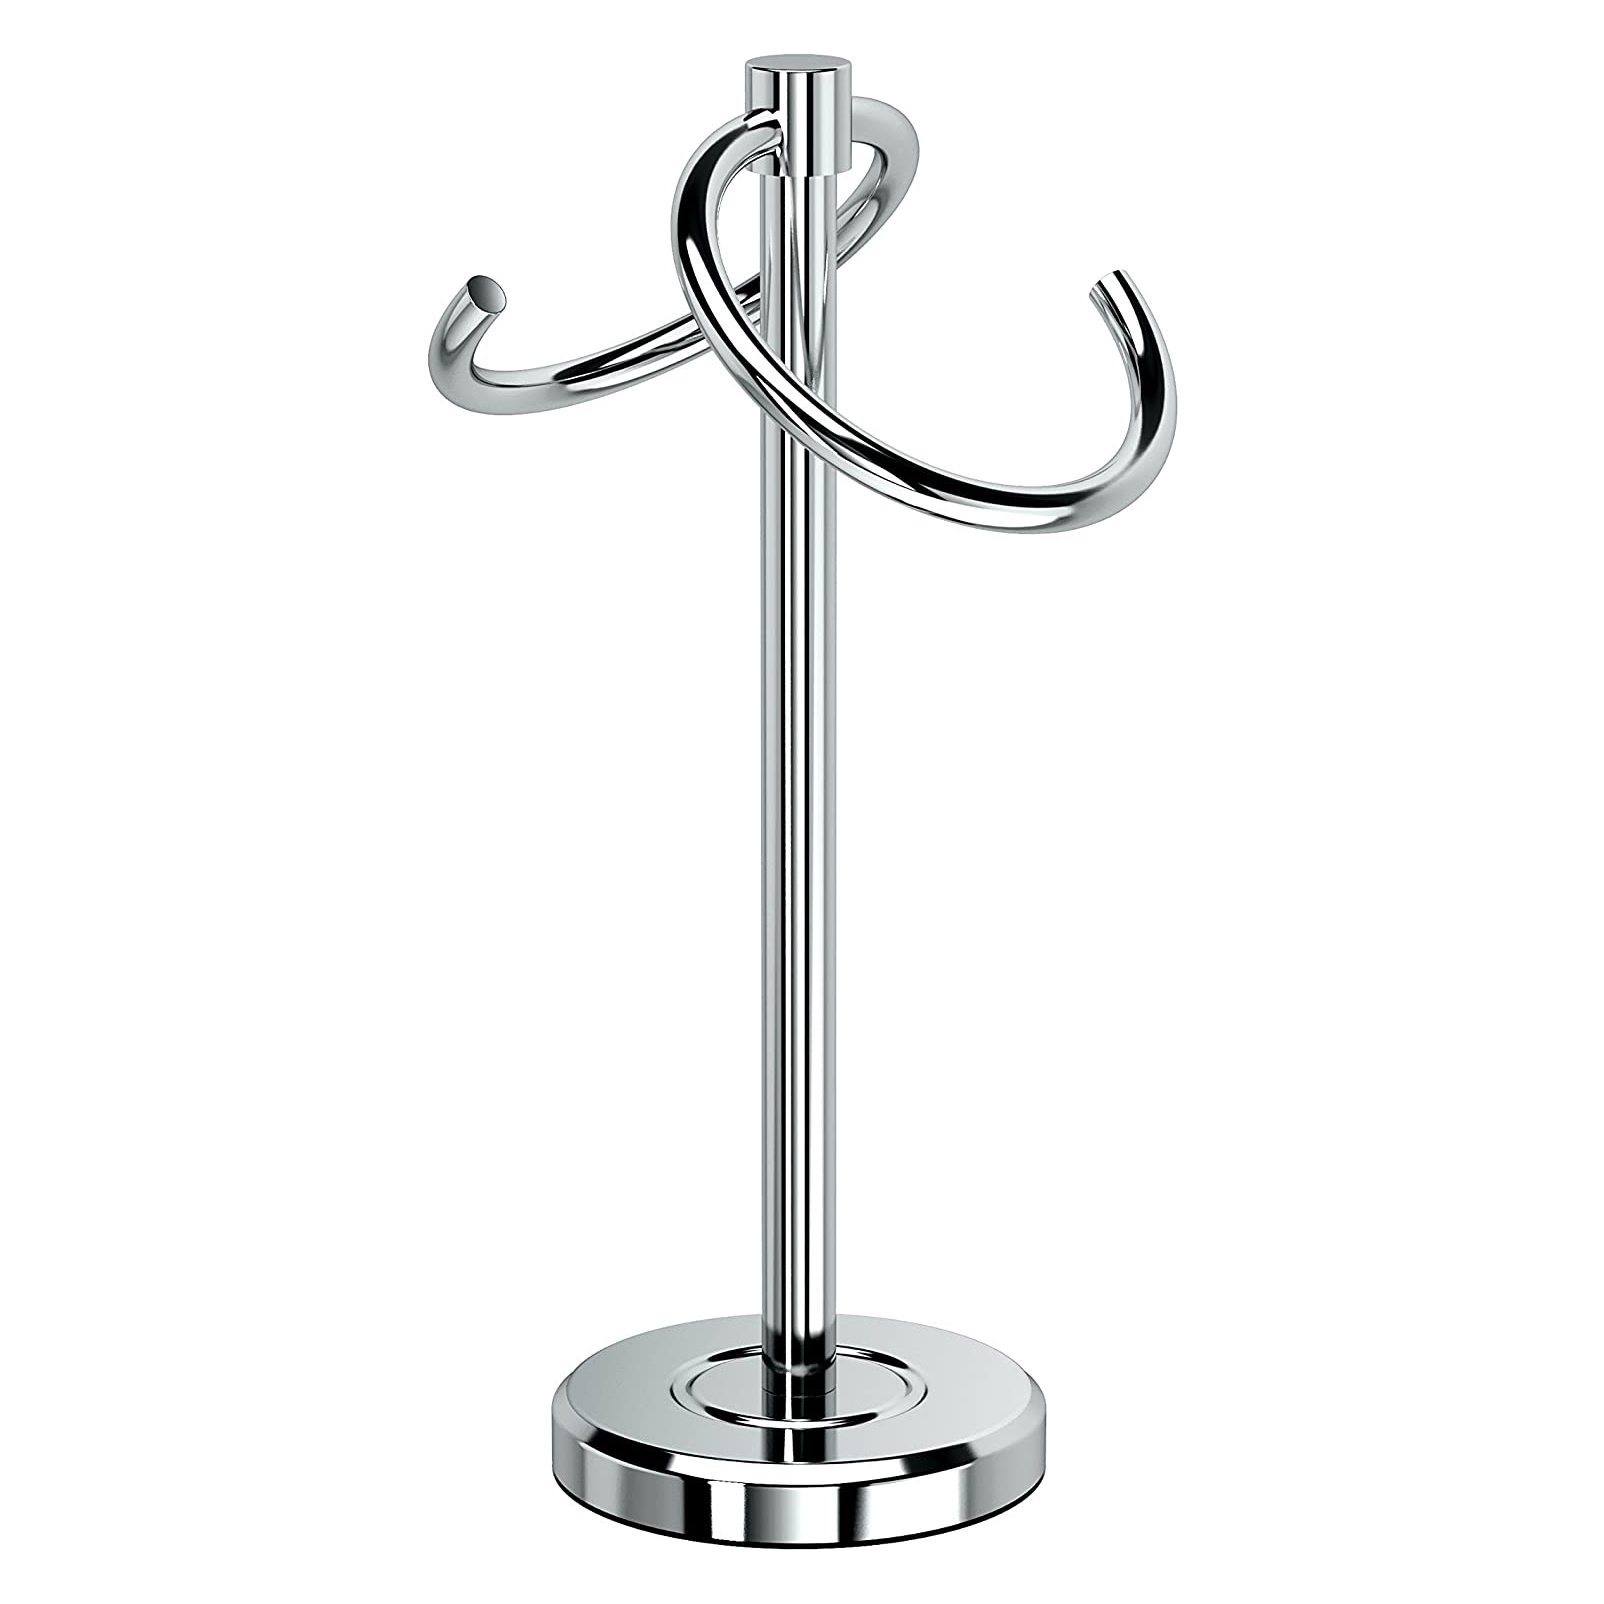 Latitude2 S-Style Countertop Towel Holder in Chrome